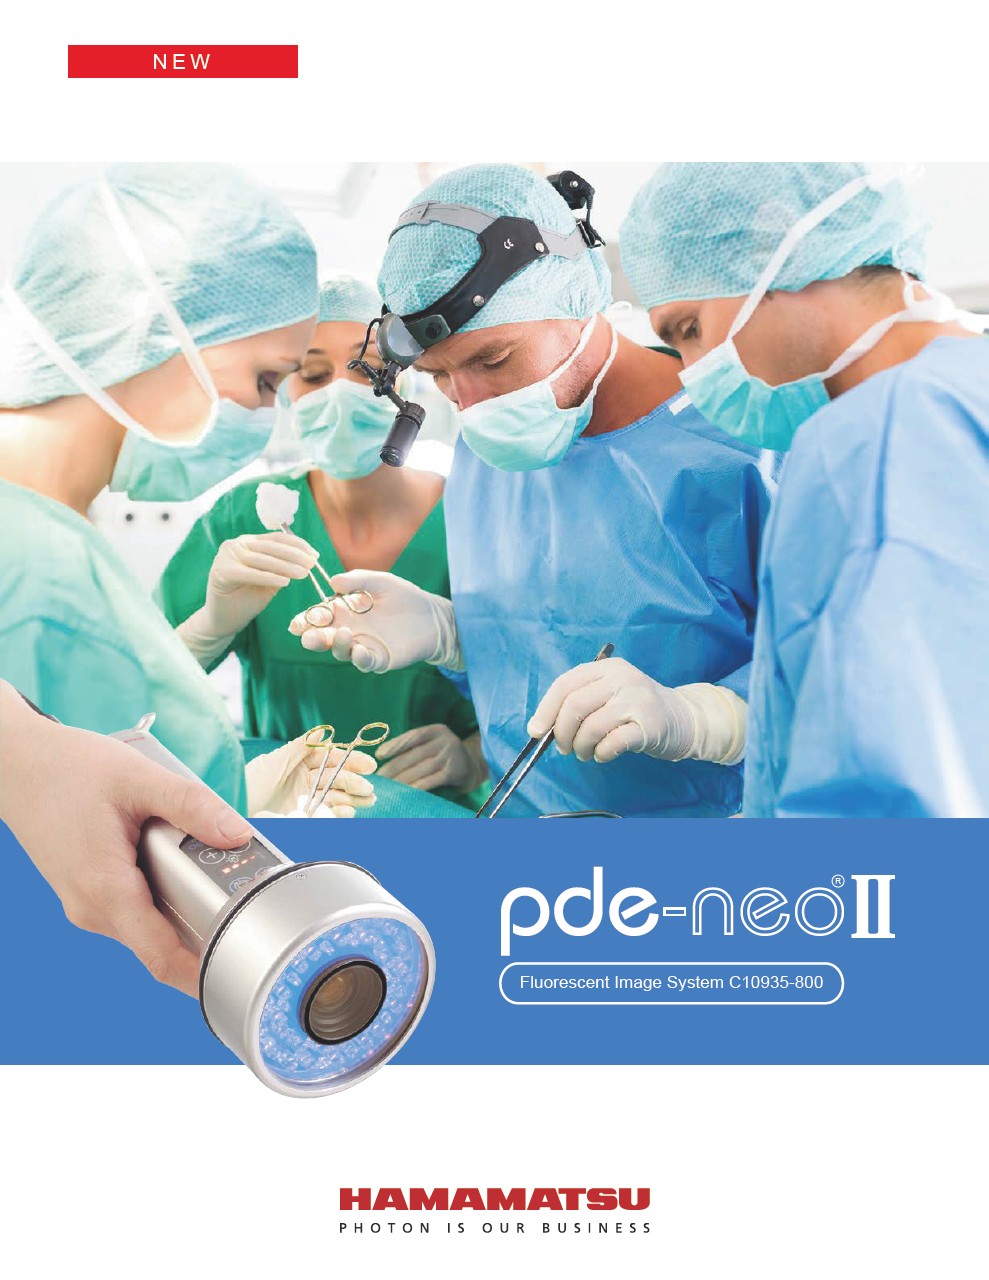 pde-neoⅡ Fluorescent Image System C10935-800